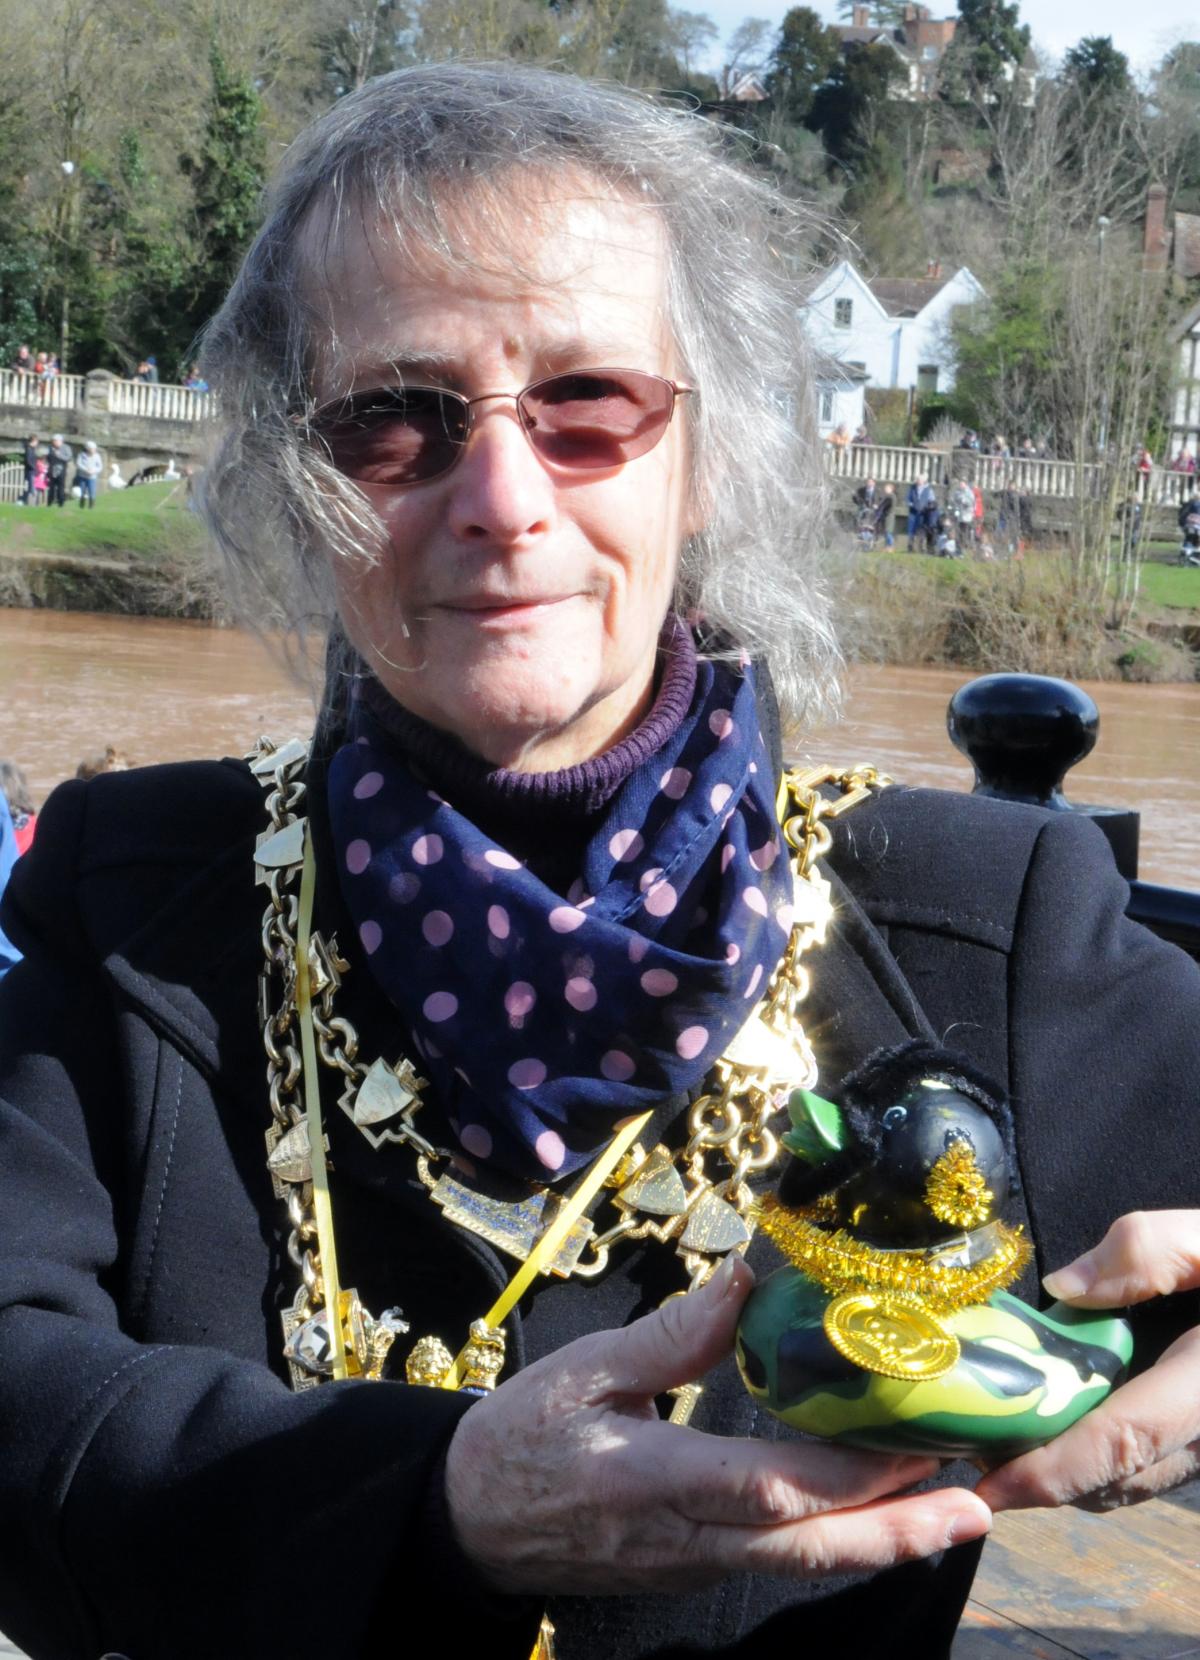 The Mayor of Bewdley, Calne Edginton-White, with the 'best dressed duck' made by Ella Boyle